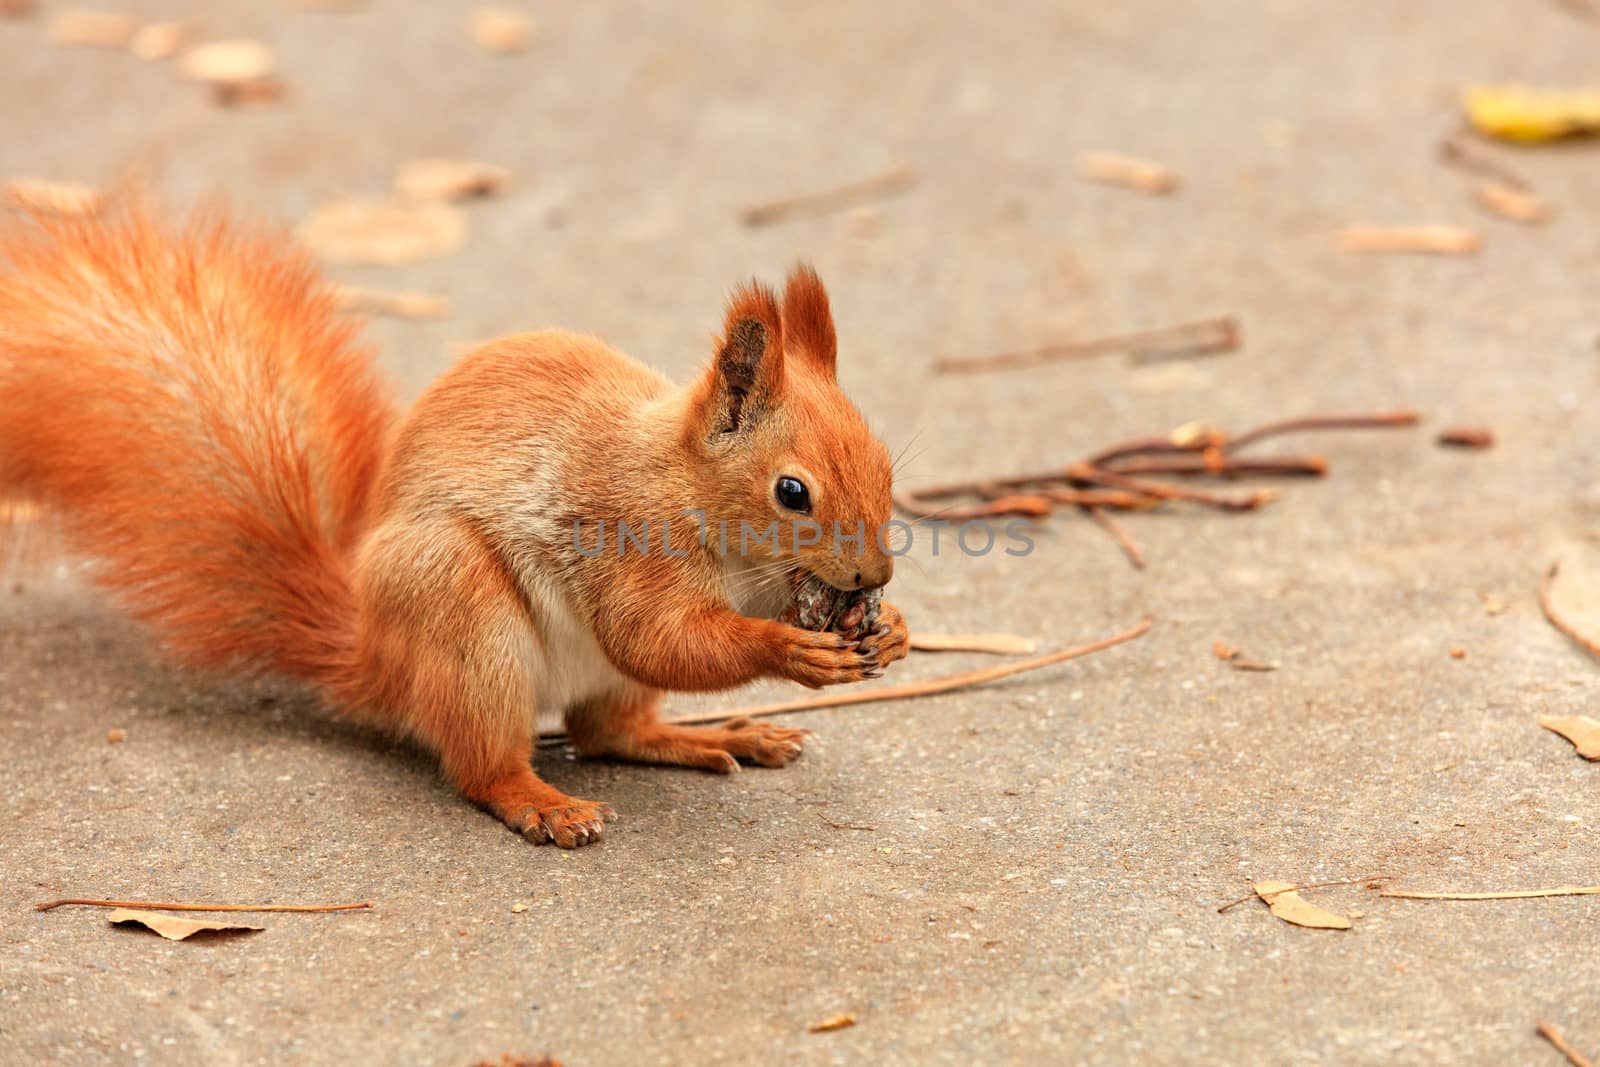 A portrait of a fluffy orange squirrel that eats a picture hazelnut with copy space.